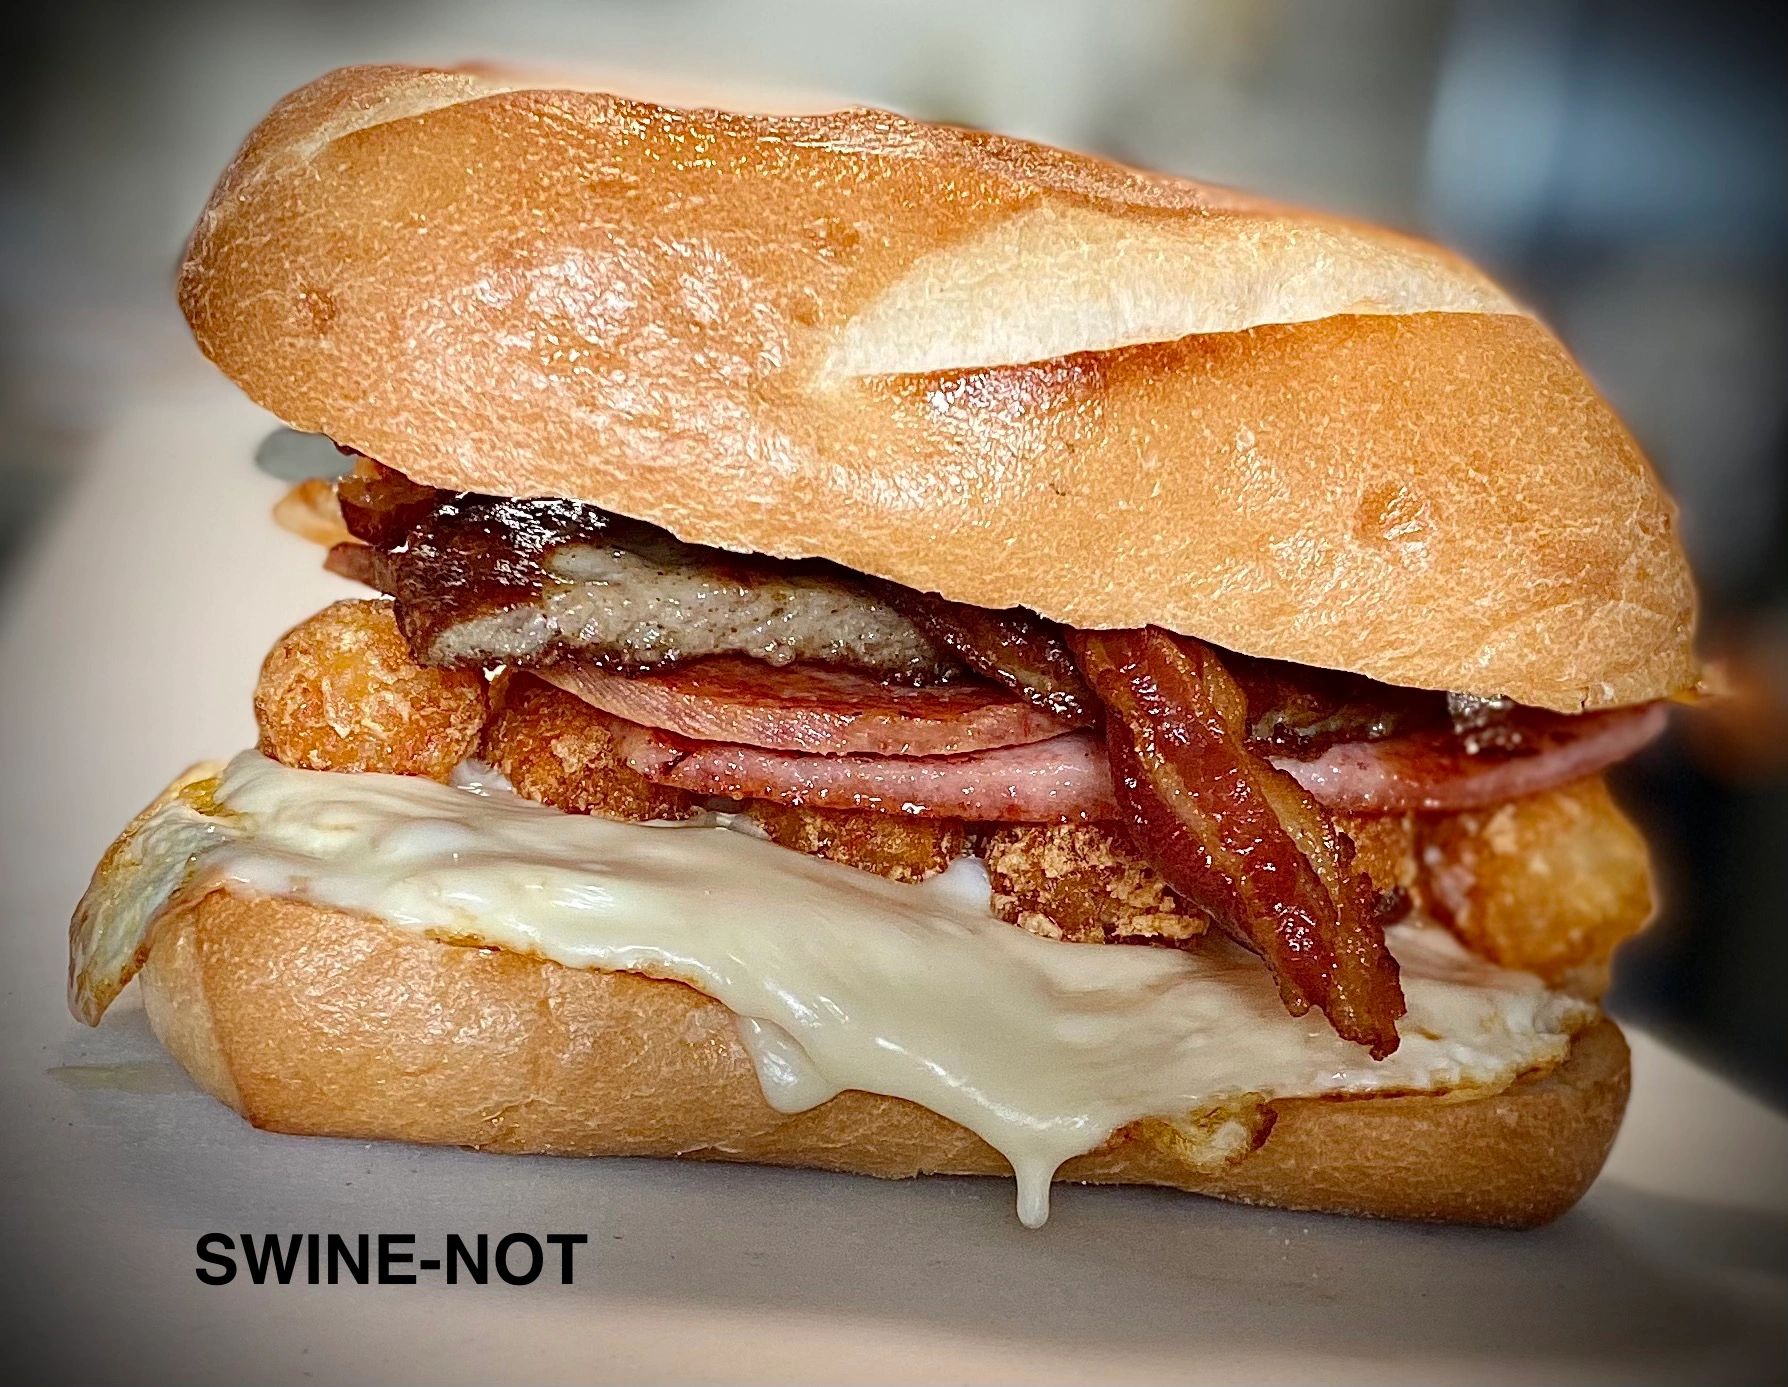 Swine-not sandwich with bacon, sausage, pork roll, tater tots, fried eggs and American cheese. 